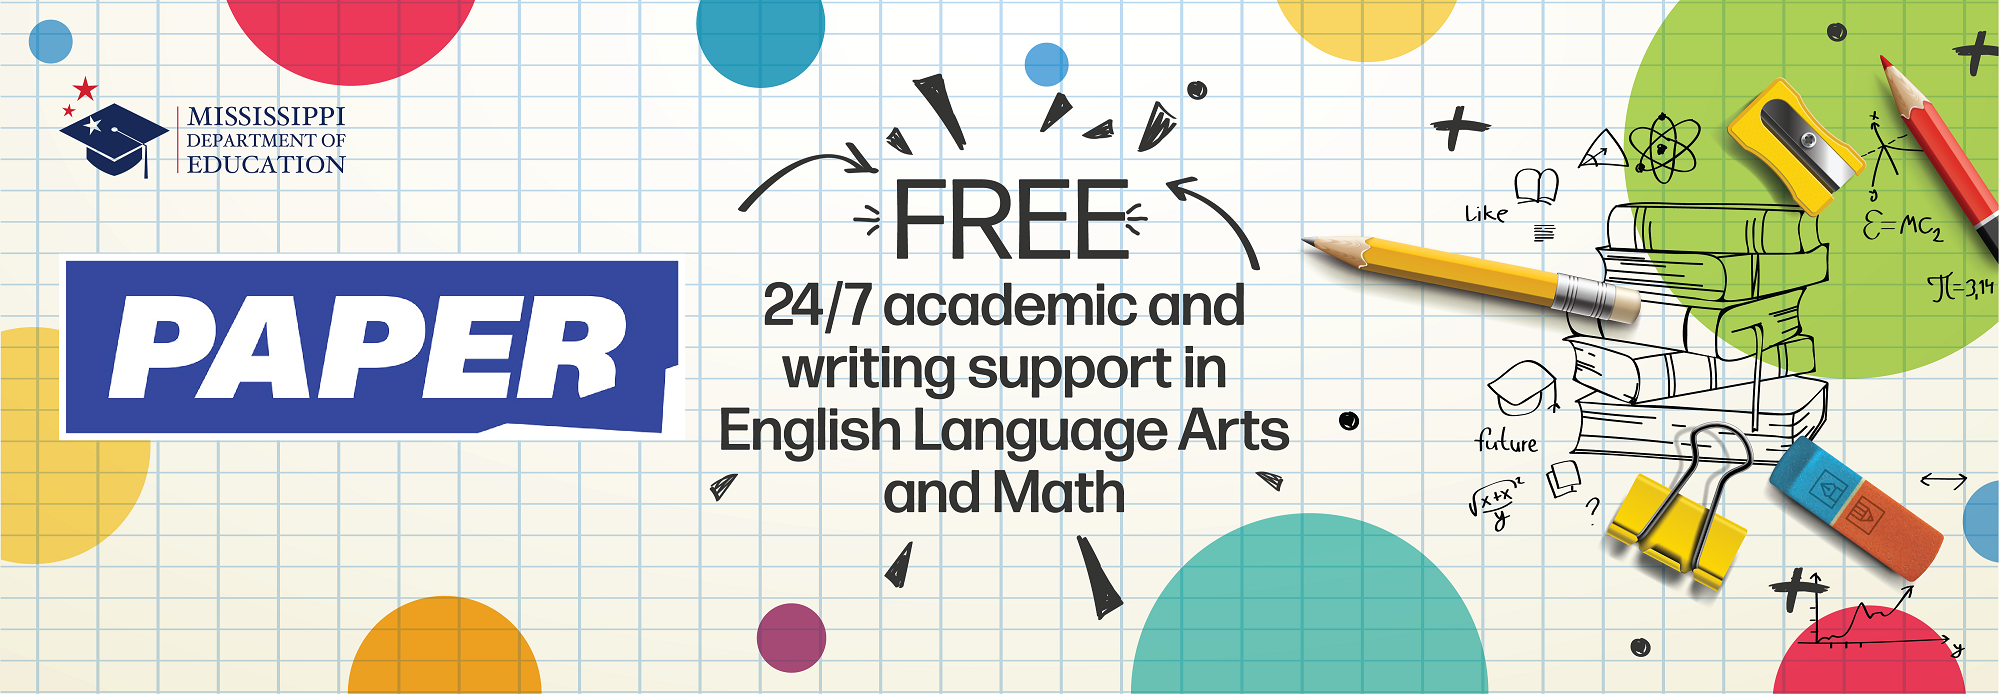 Free 24/7 academic and writing support in English Language Arts and Math